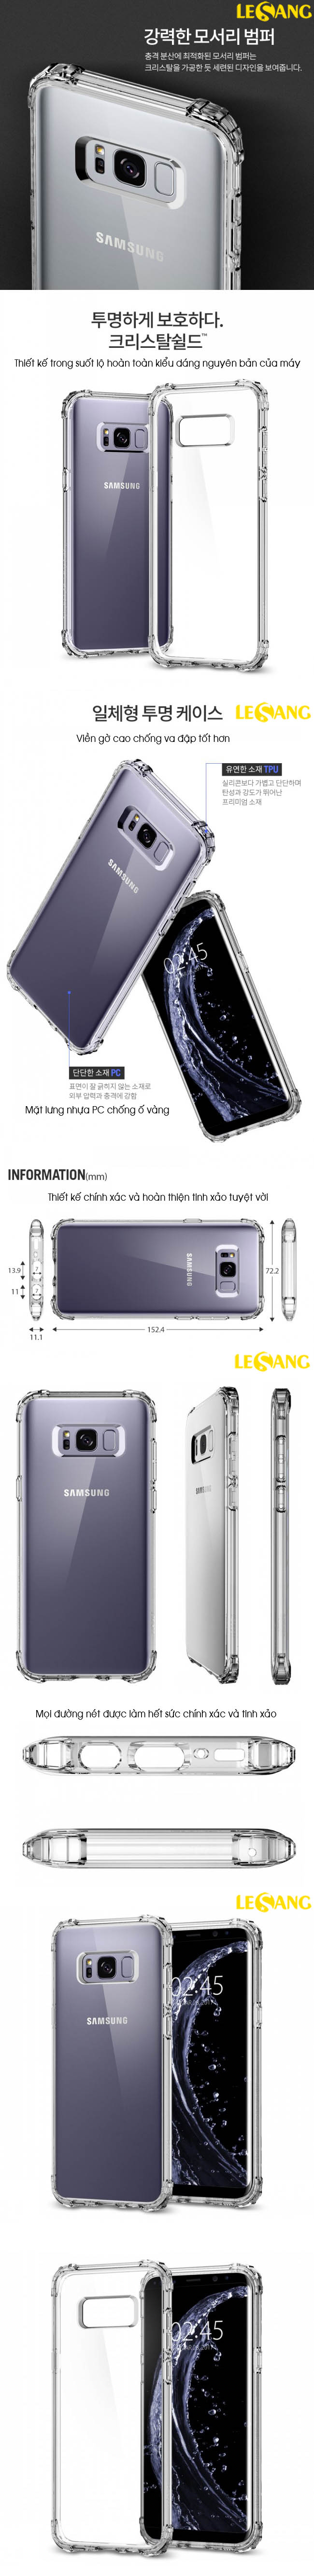 Ốp lưng Galaxy S8 Spigen Crytal Shell chống sốc trong suốt 325